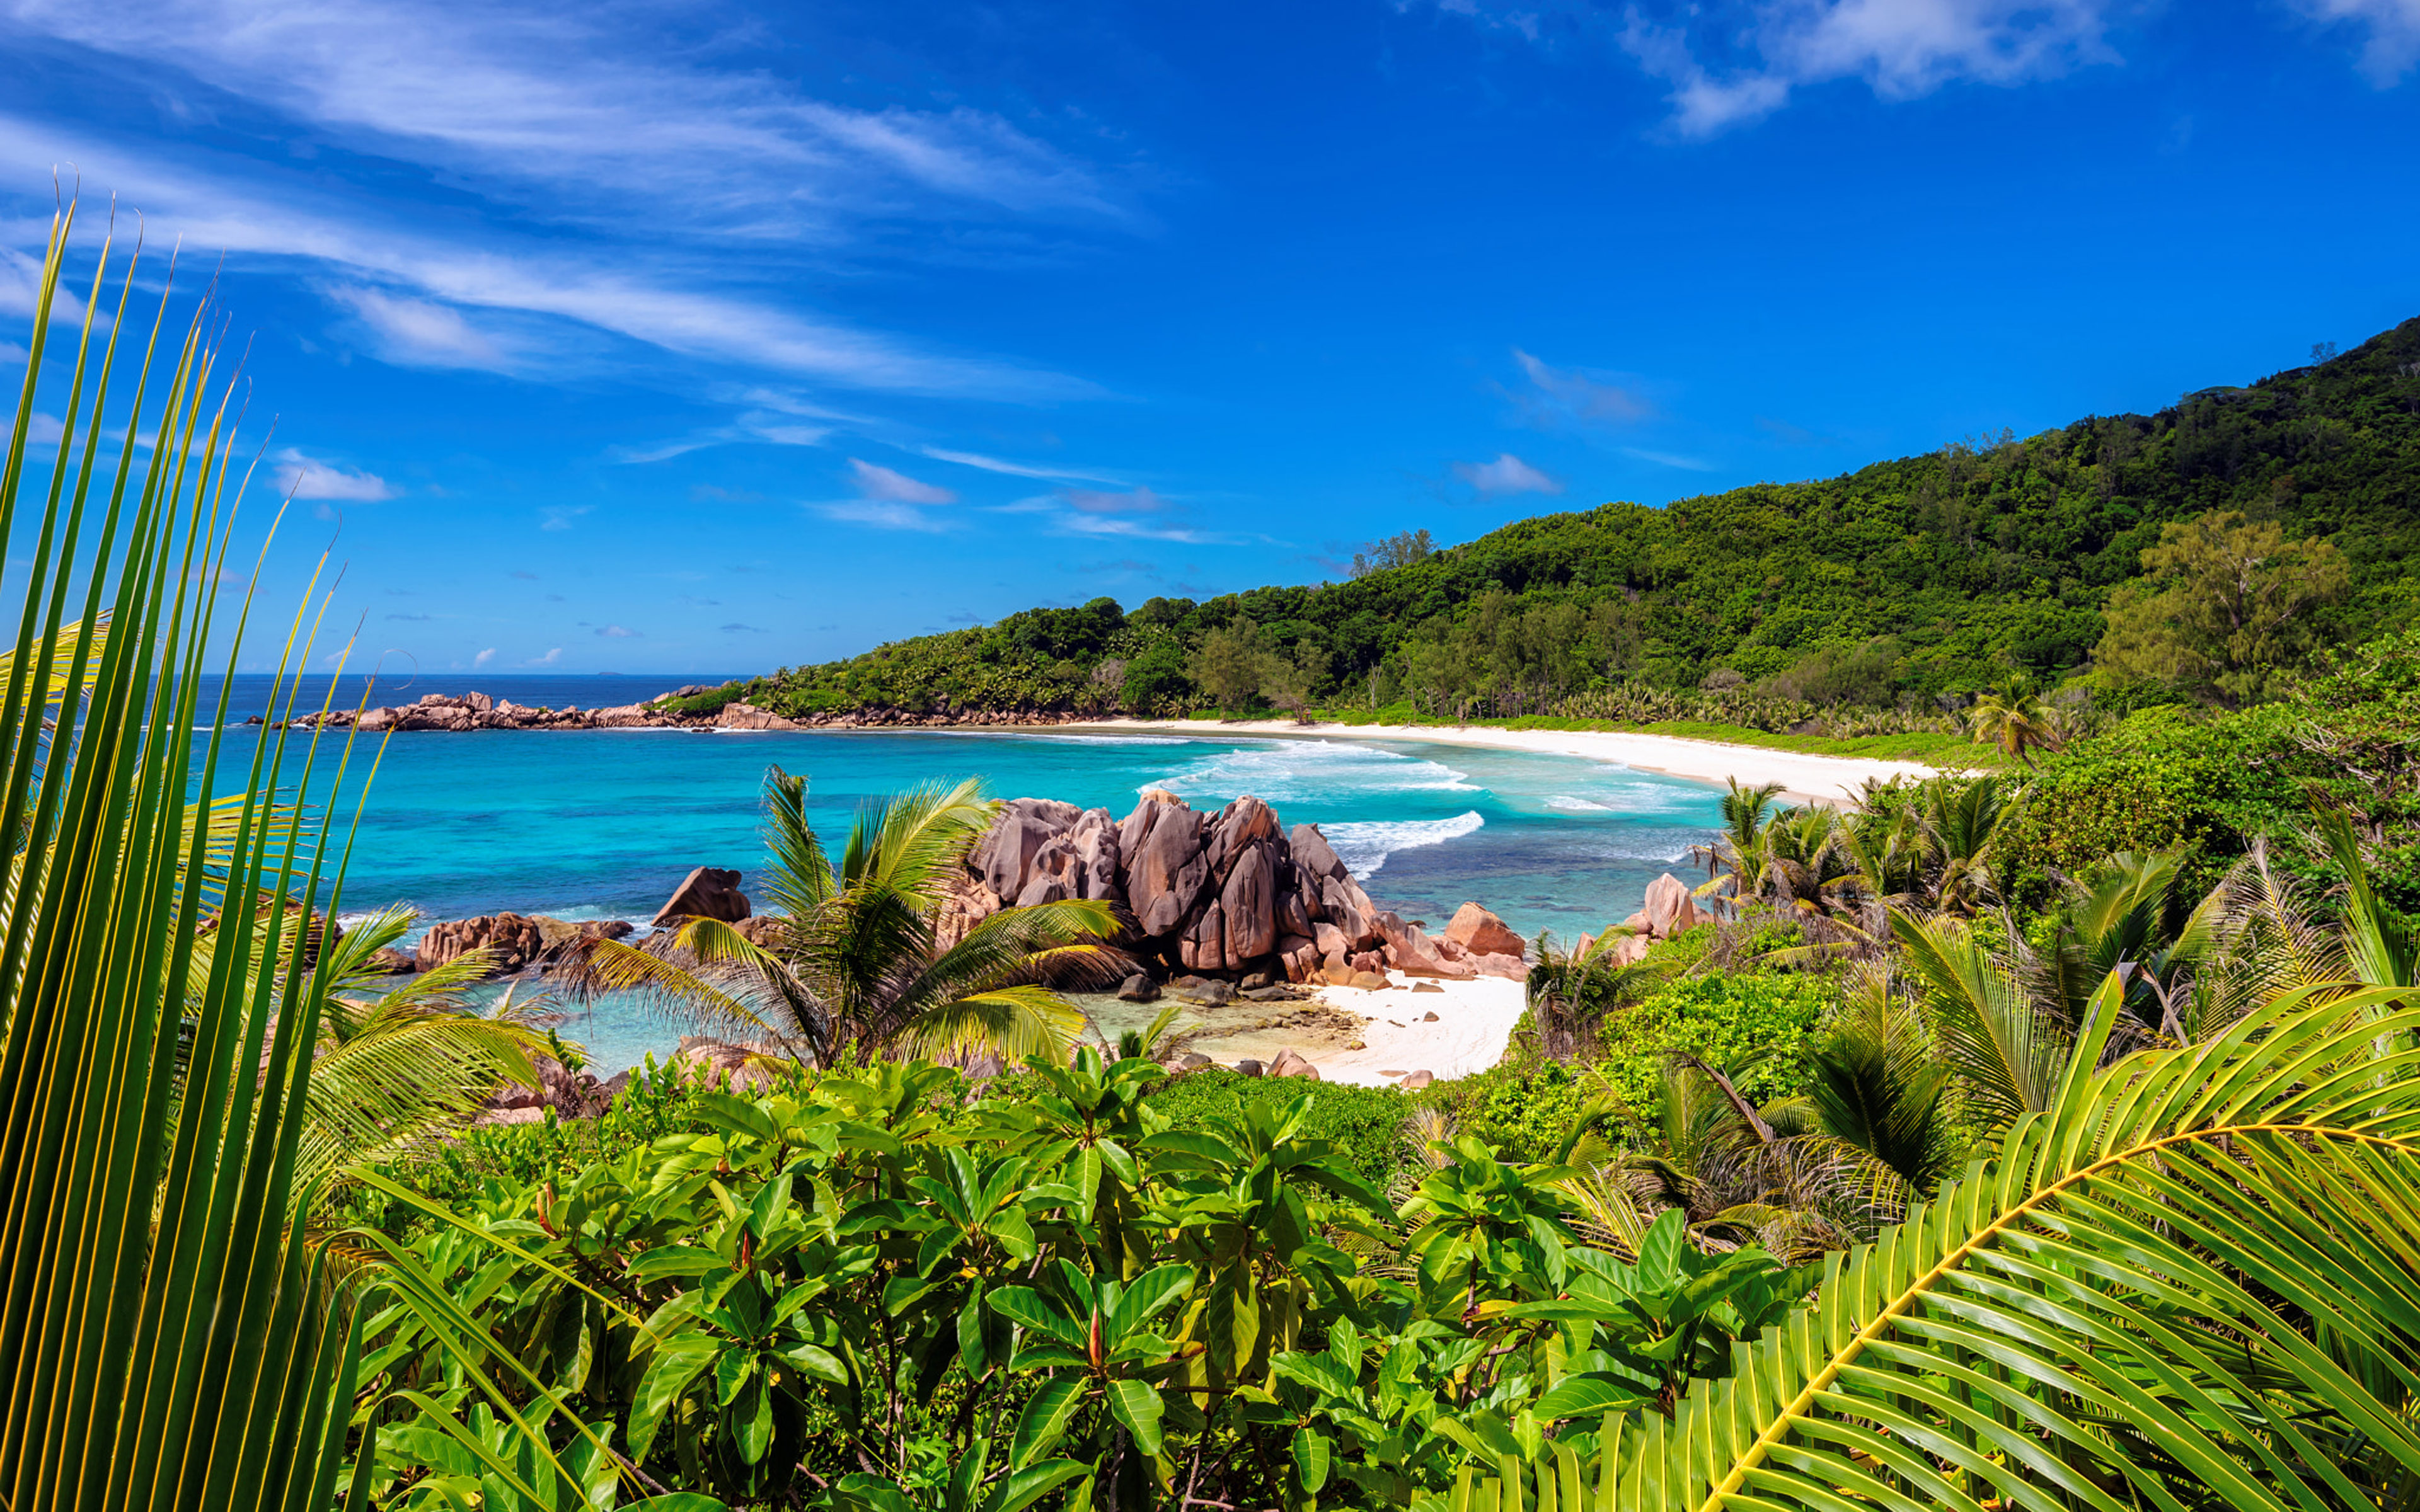 Anse Coco Beach On Paradise Island La Digue Island Seychelles 4k Ultra Hd  Wallpaper For Desktop Laptop Tablet Mobile Phones And Tv 3840x2400 :  